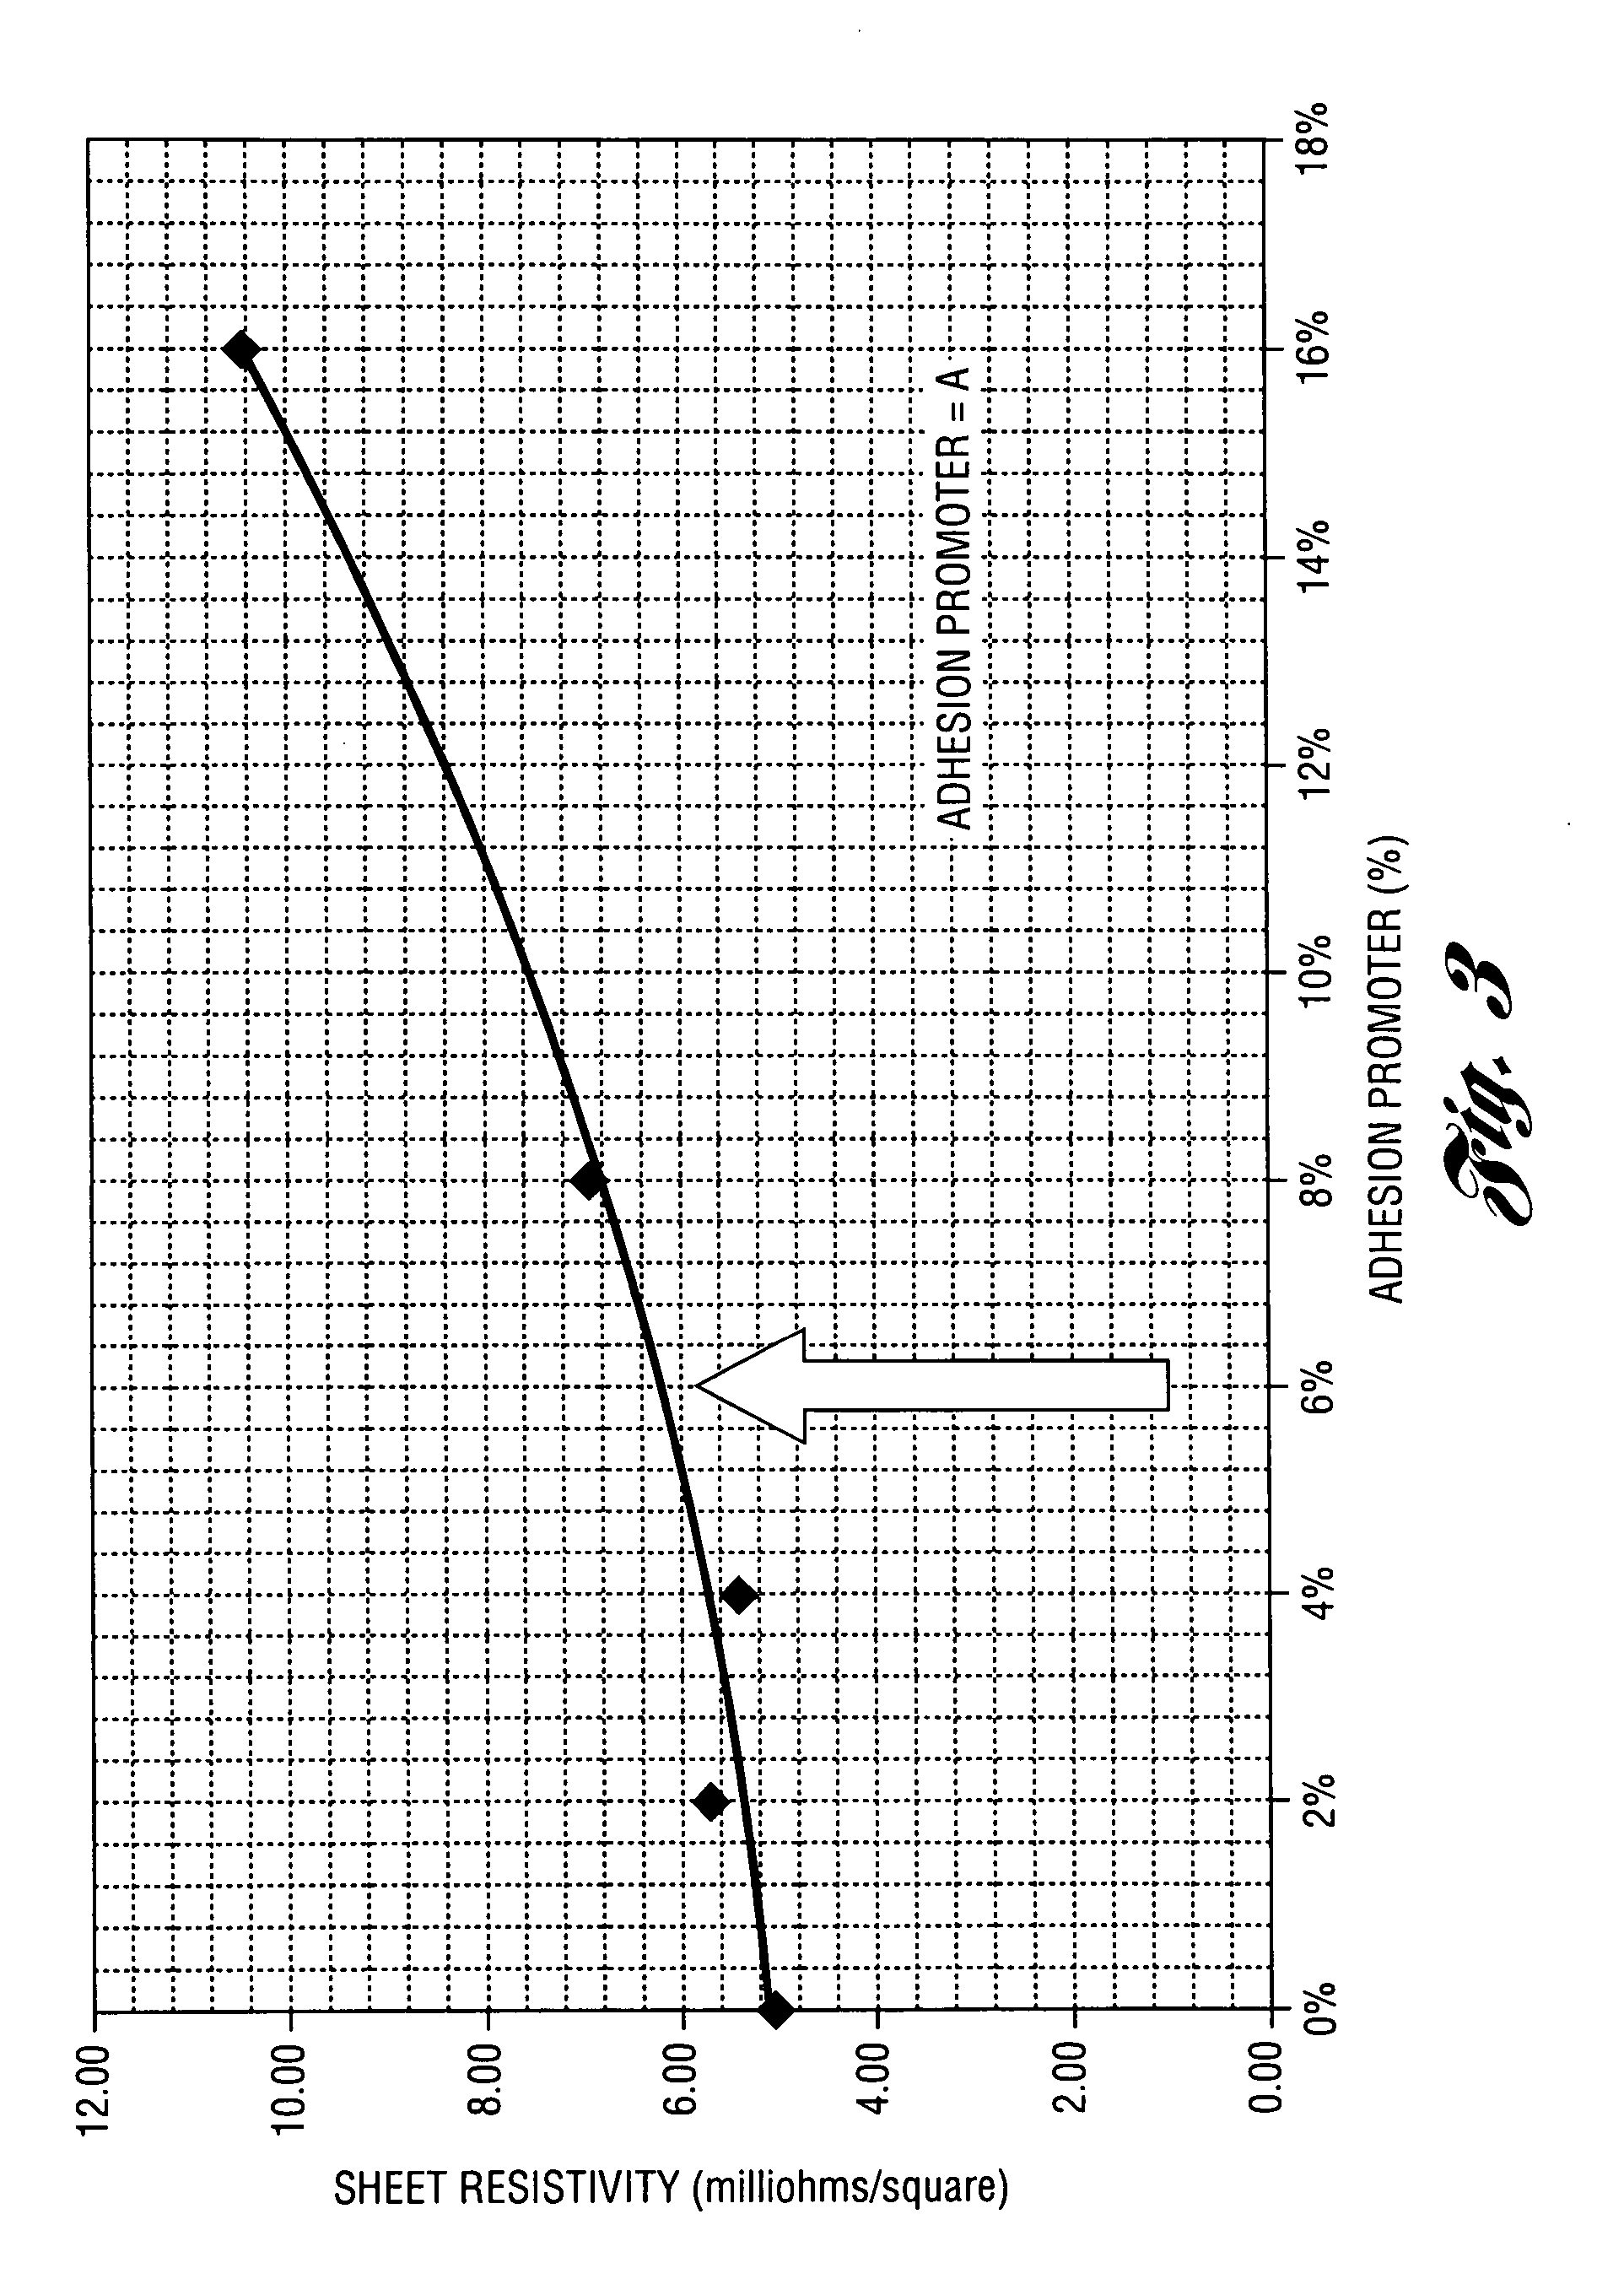 Plastic glazing system having a promotion of ink adhesion on the surface thereof